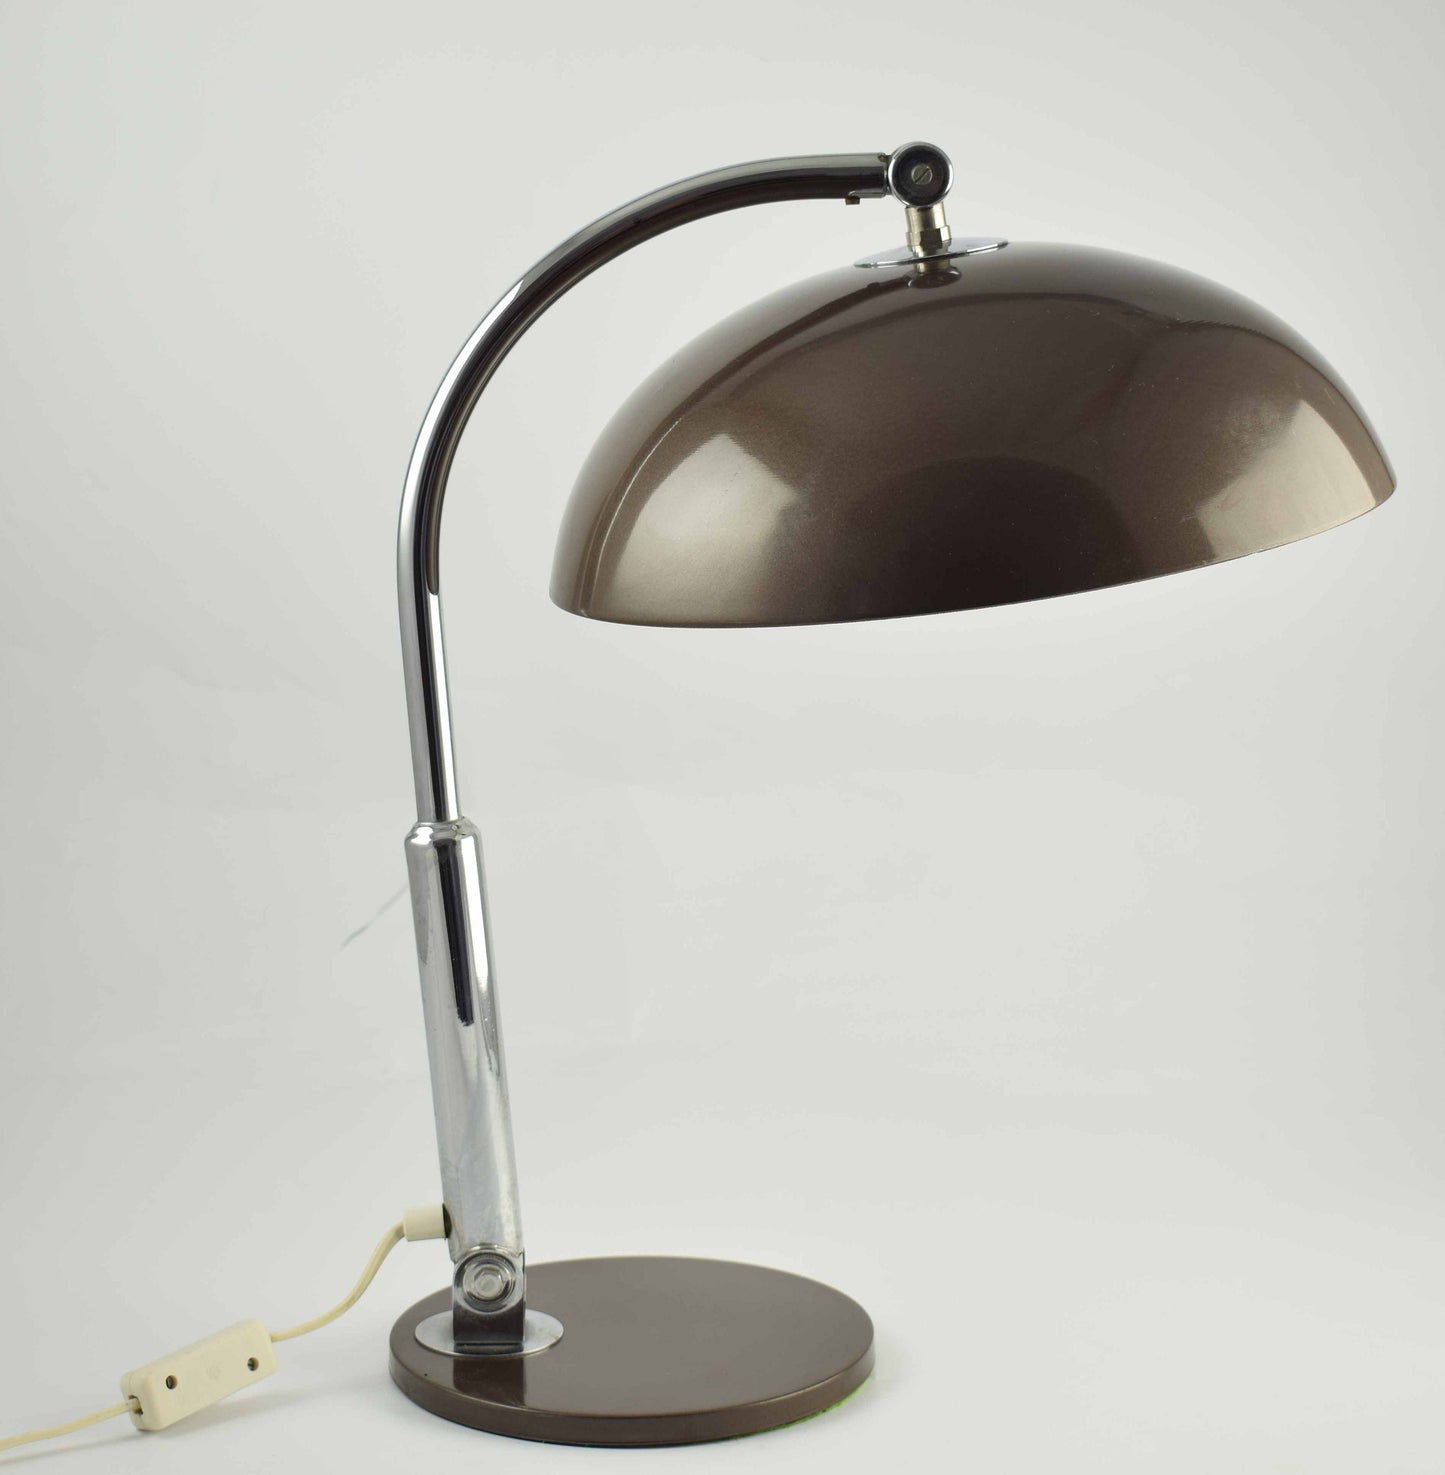 Hala Desk lamp Model 144 designed Busquet, famous brown and chrome design table light from The Netherlands